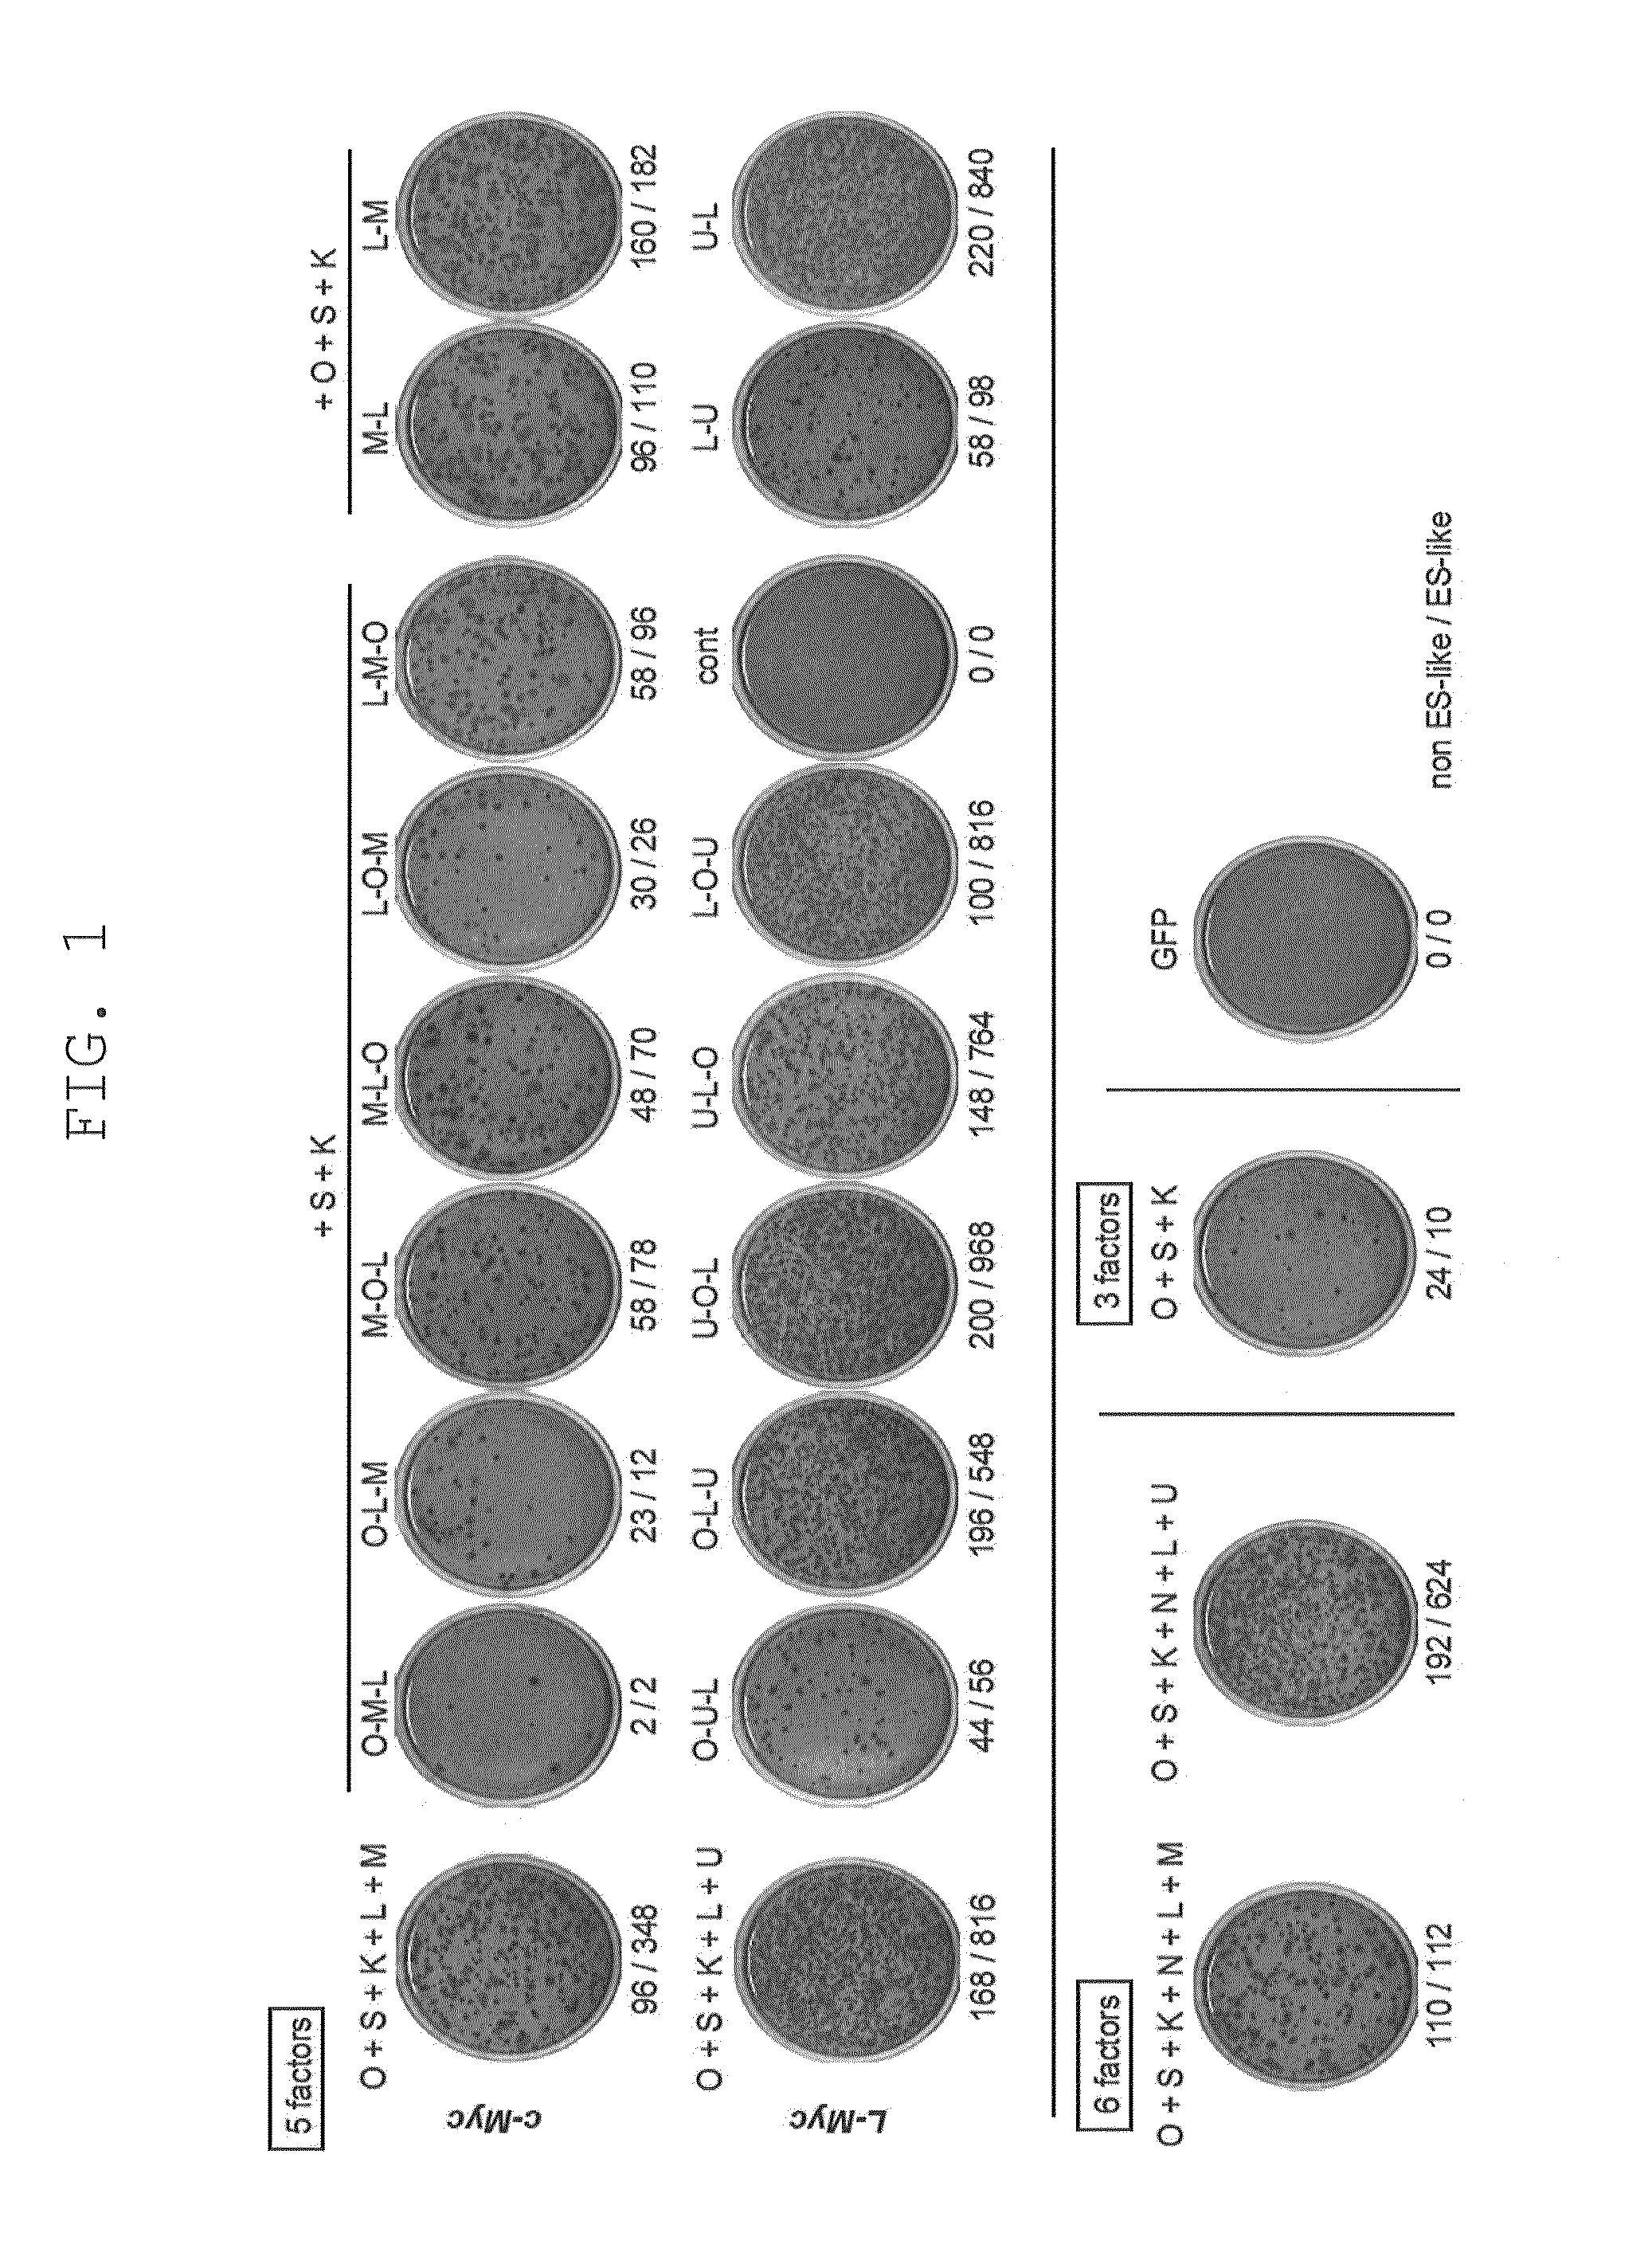 Method of producing induced pluripotent stem cells using inhibitors of P53